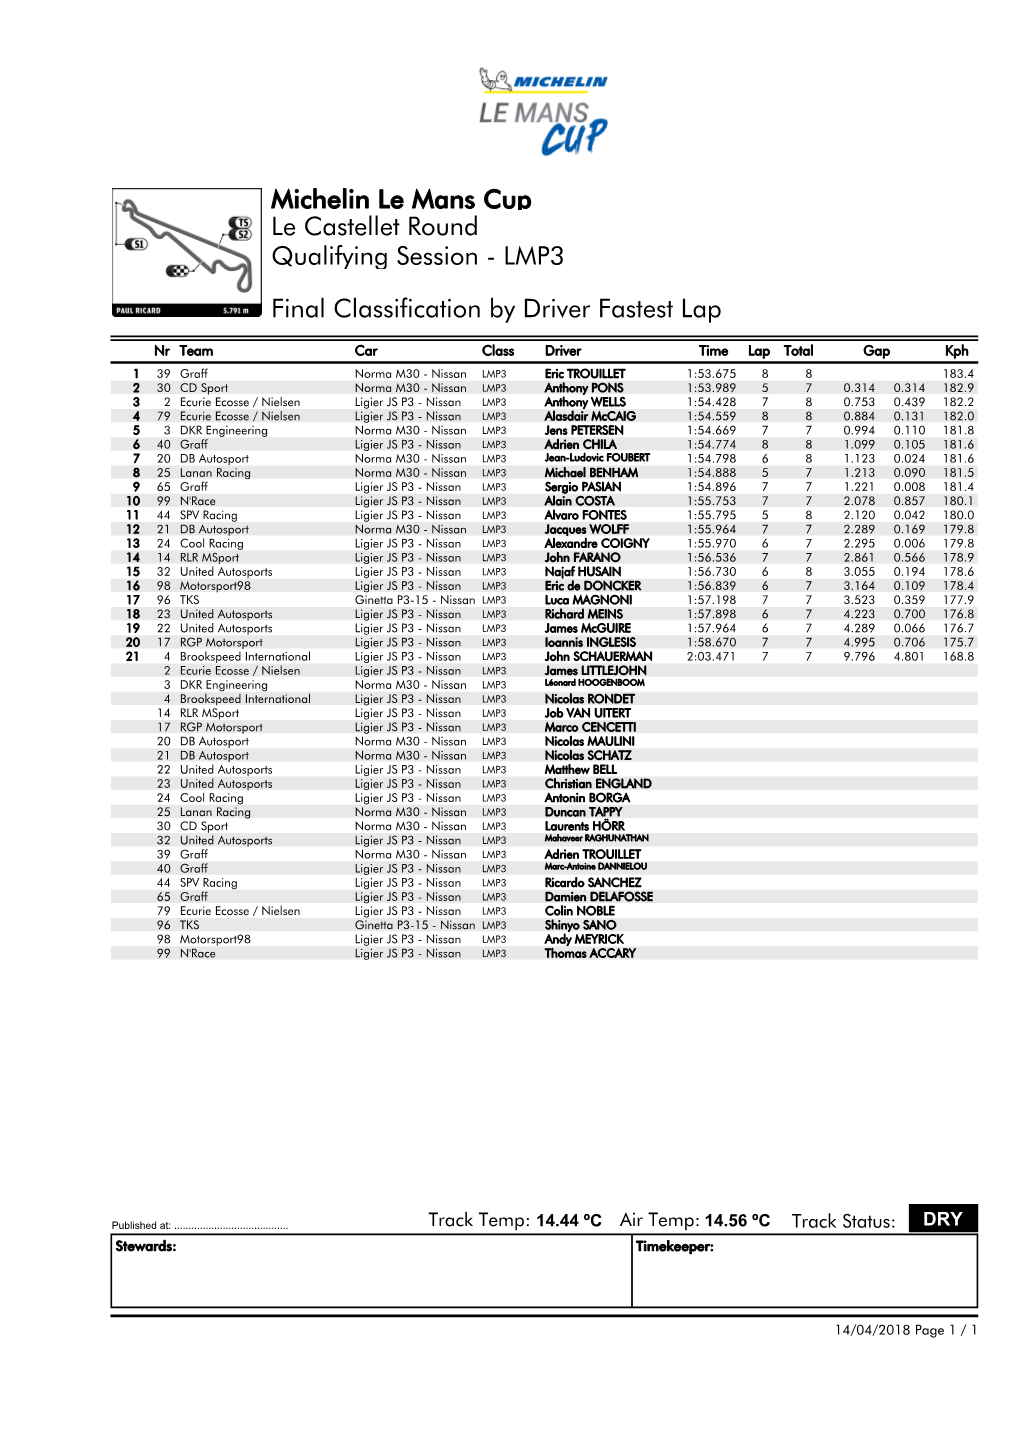 Final Classification by Driver Fastest Lap Qualifying Session